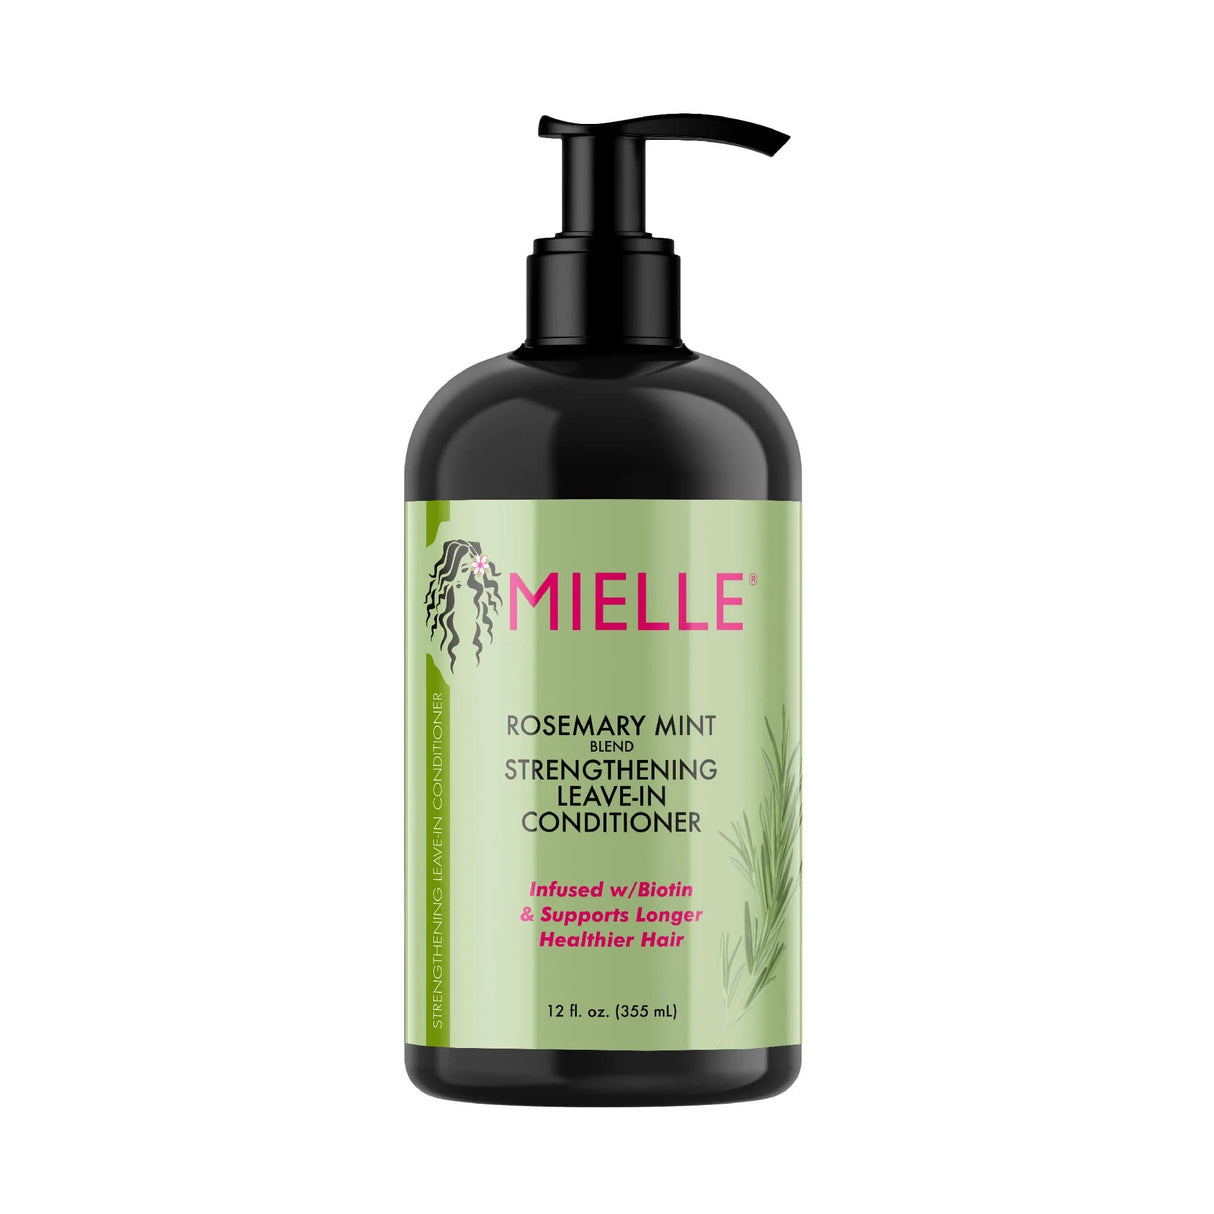 Mielle® Rosemary Mint Strengthening Leave-In Conditioner